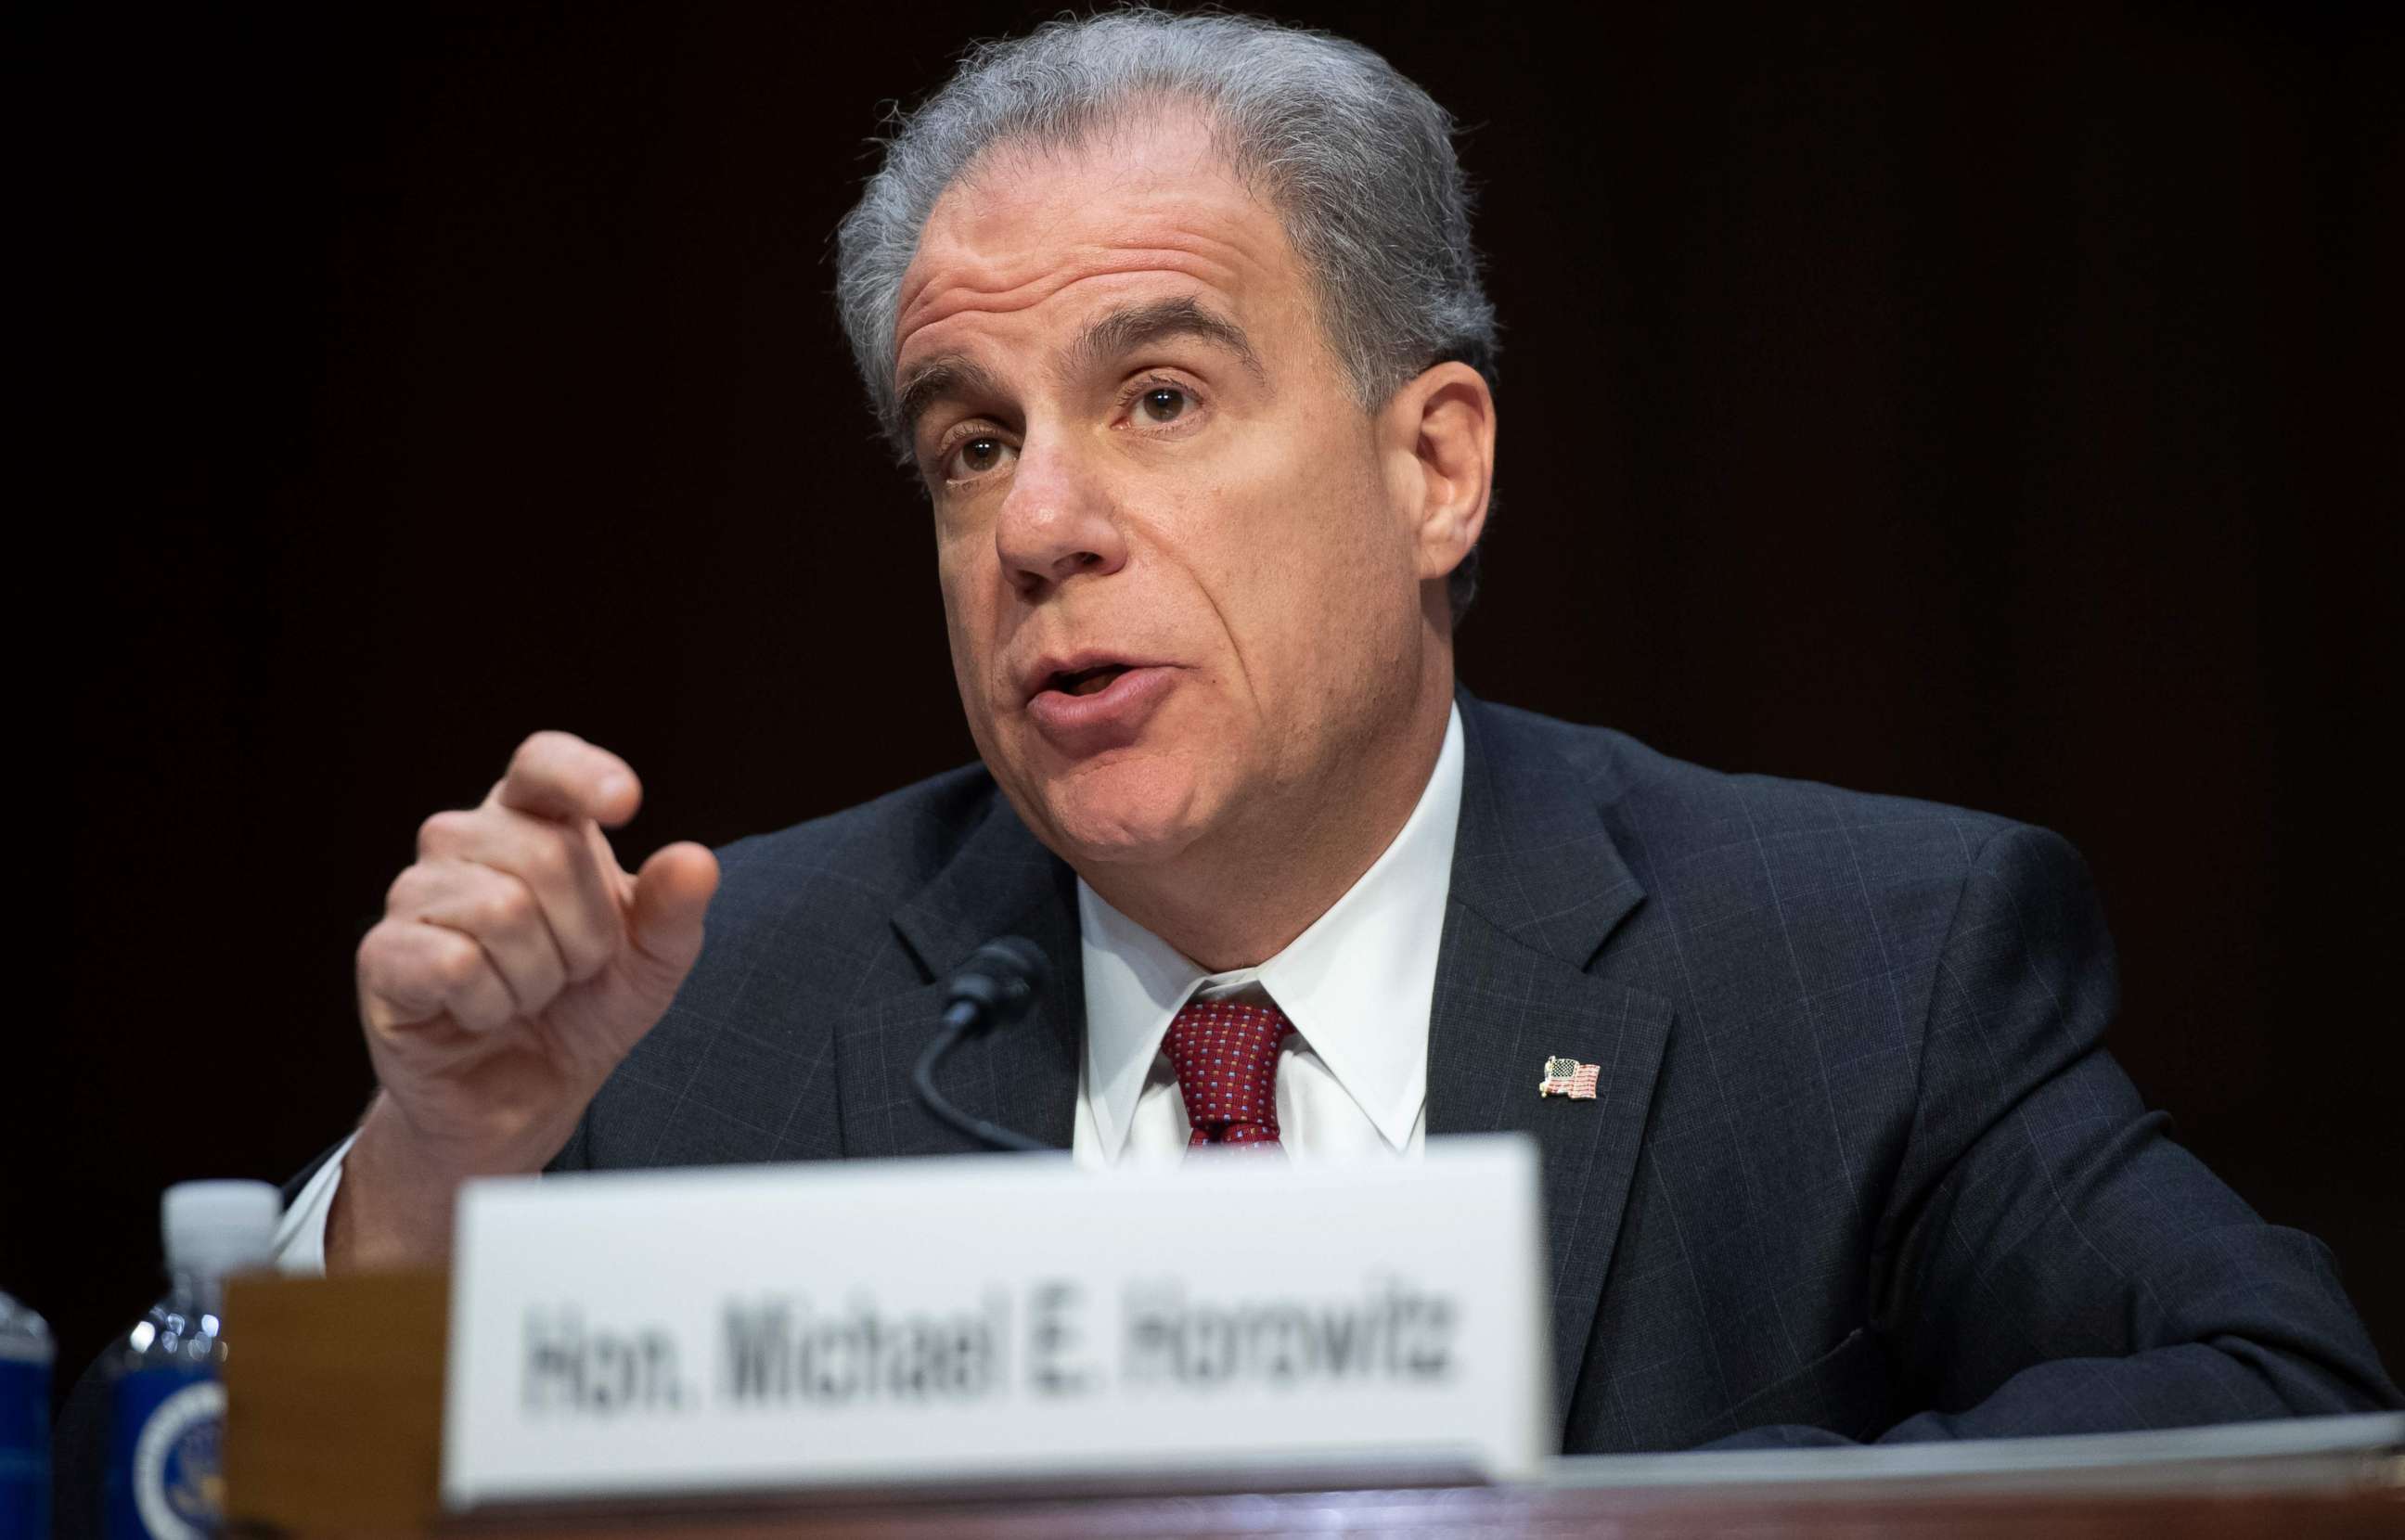 PHOTO: Justice Department Inspector General Michael Horowitz testifies about the Inspector General's report on alleged abuses of the Foreign Intelligence Surveillance Act during a Senate Judiciary Committee hearing in Washington, Dec. 11, 2019.